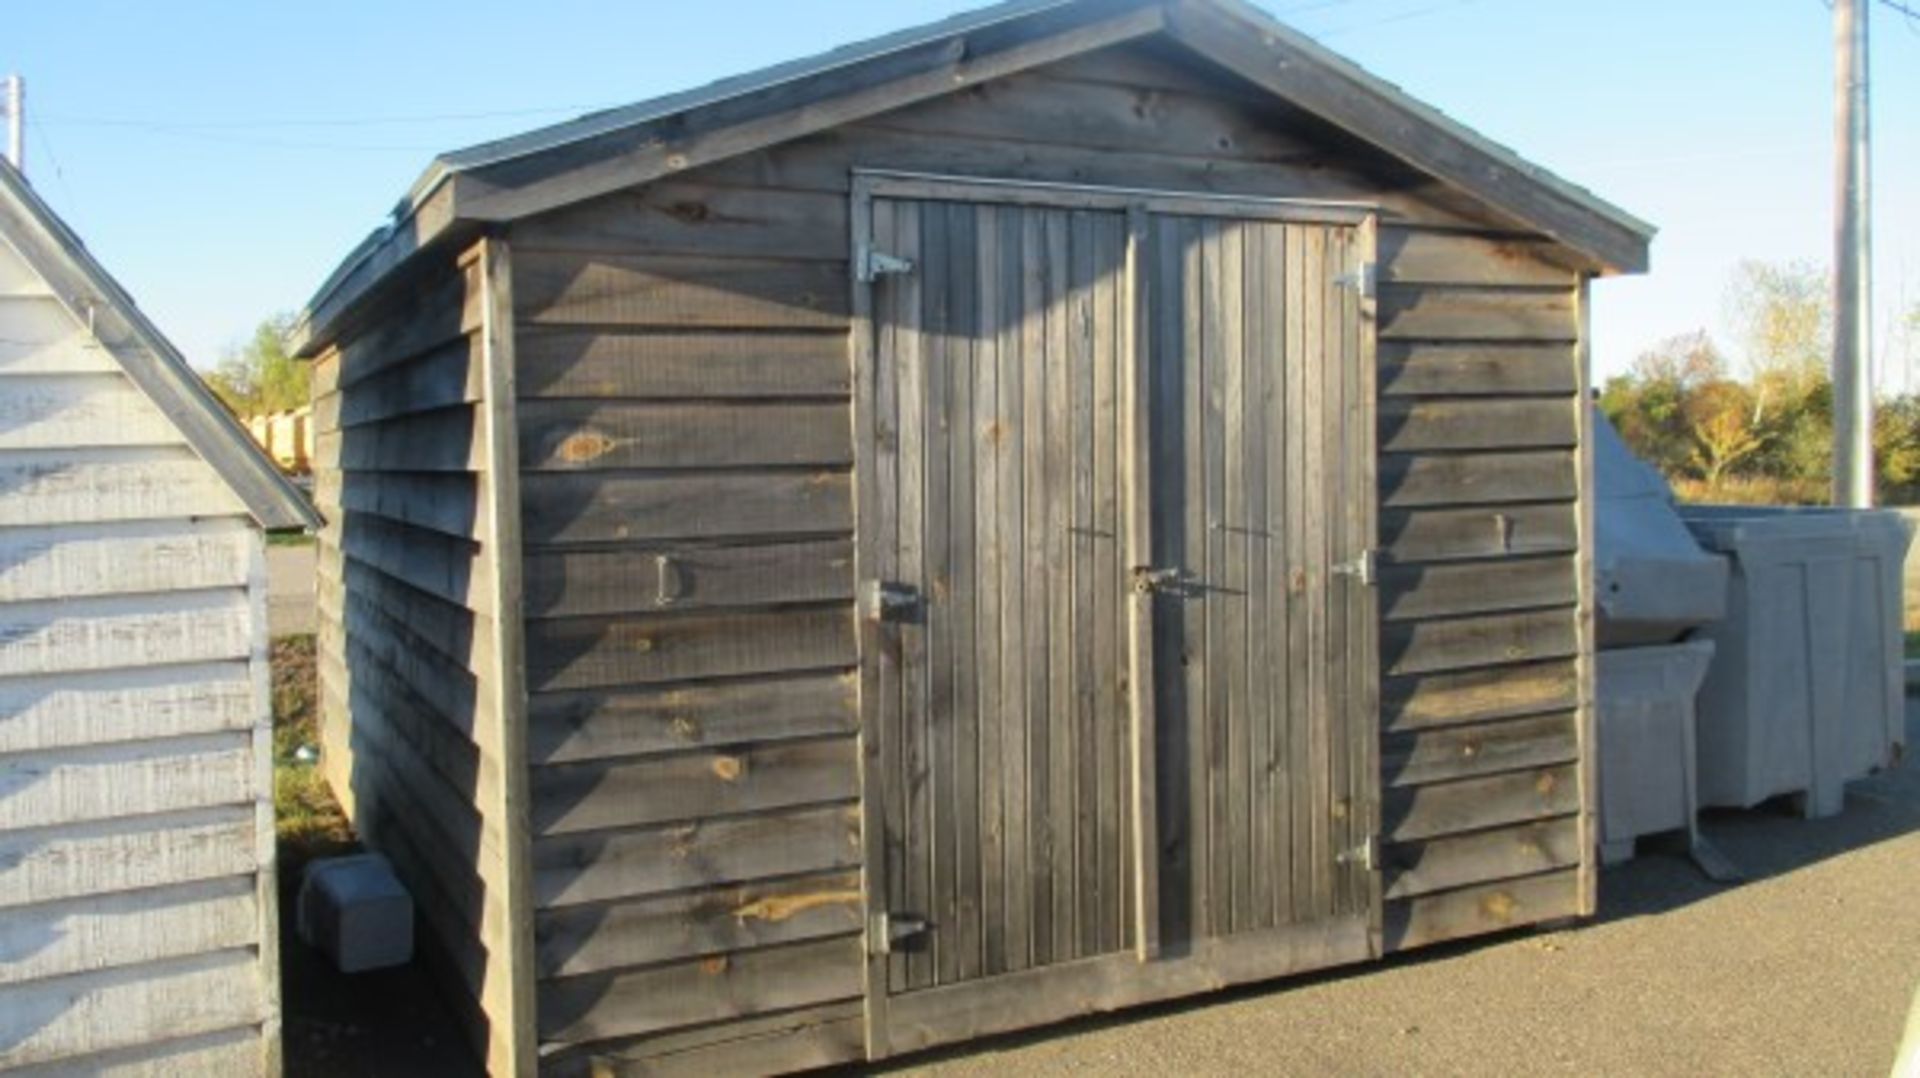 14' X 10' X 6.5' h BARN DOOR SHED W/ PICNIC TABLE